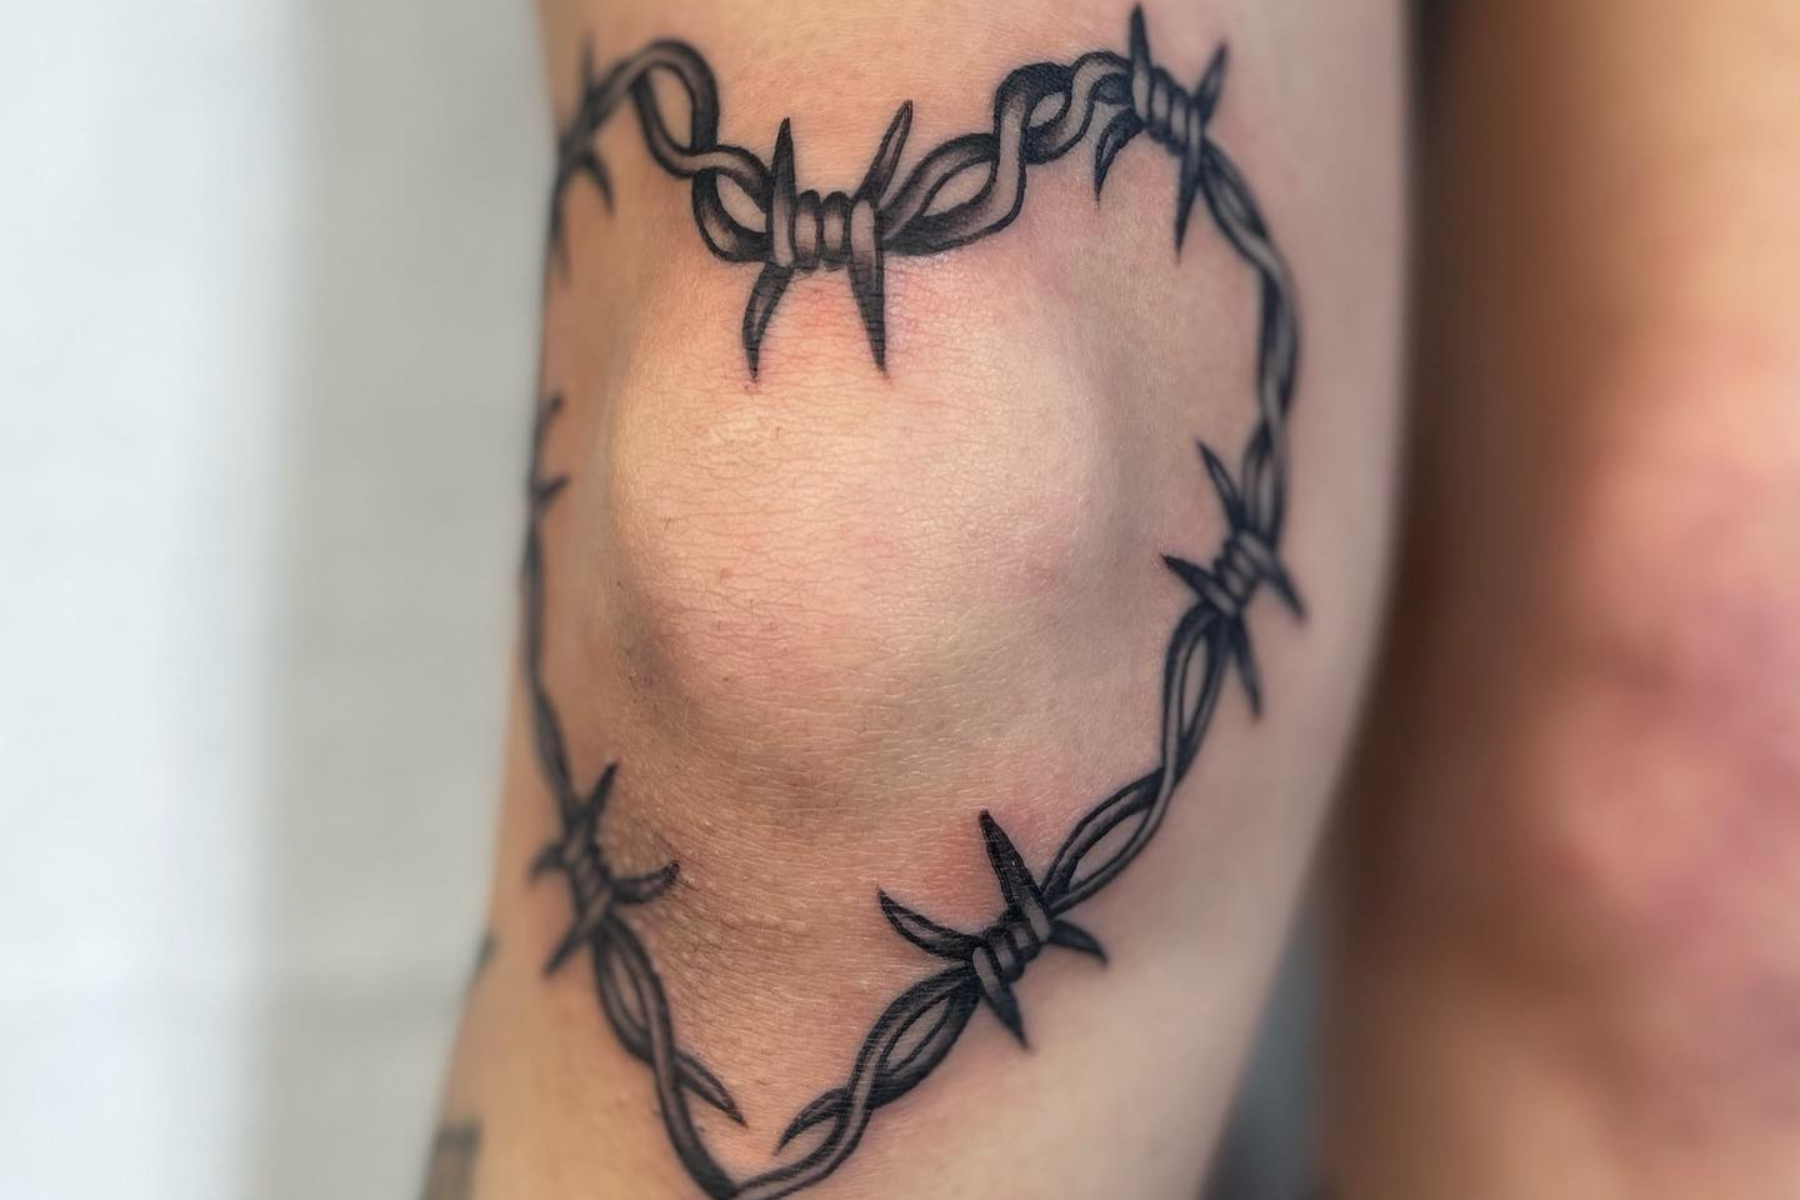 Barbed wire knee tattoo